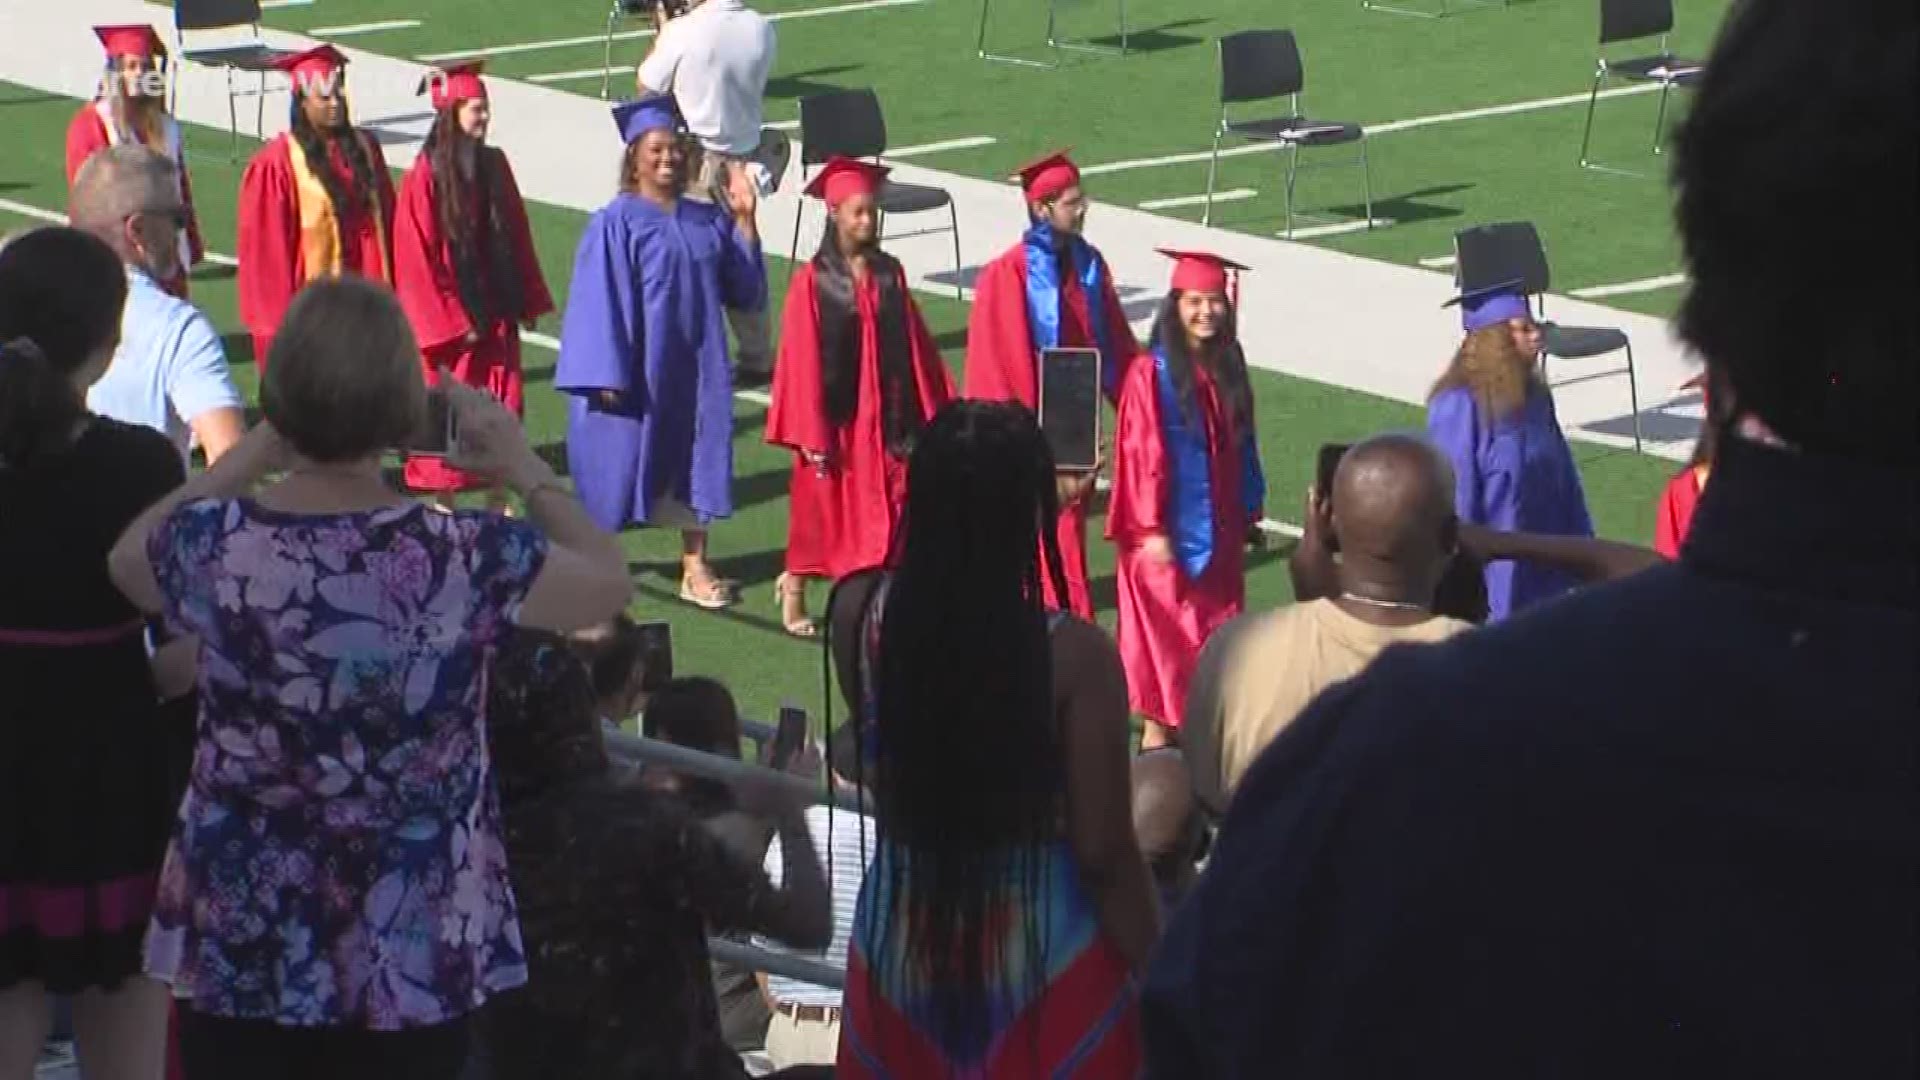 West Brook is the largest high school in Southeast Texas. It was an exciting moment for the seniors, especially meaningful during the coronavirus pandemic.